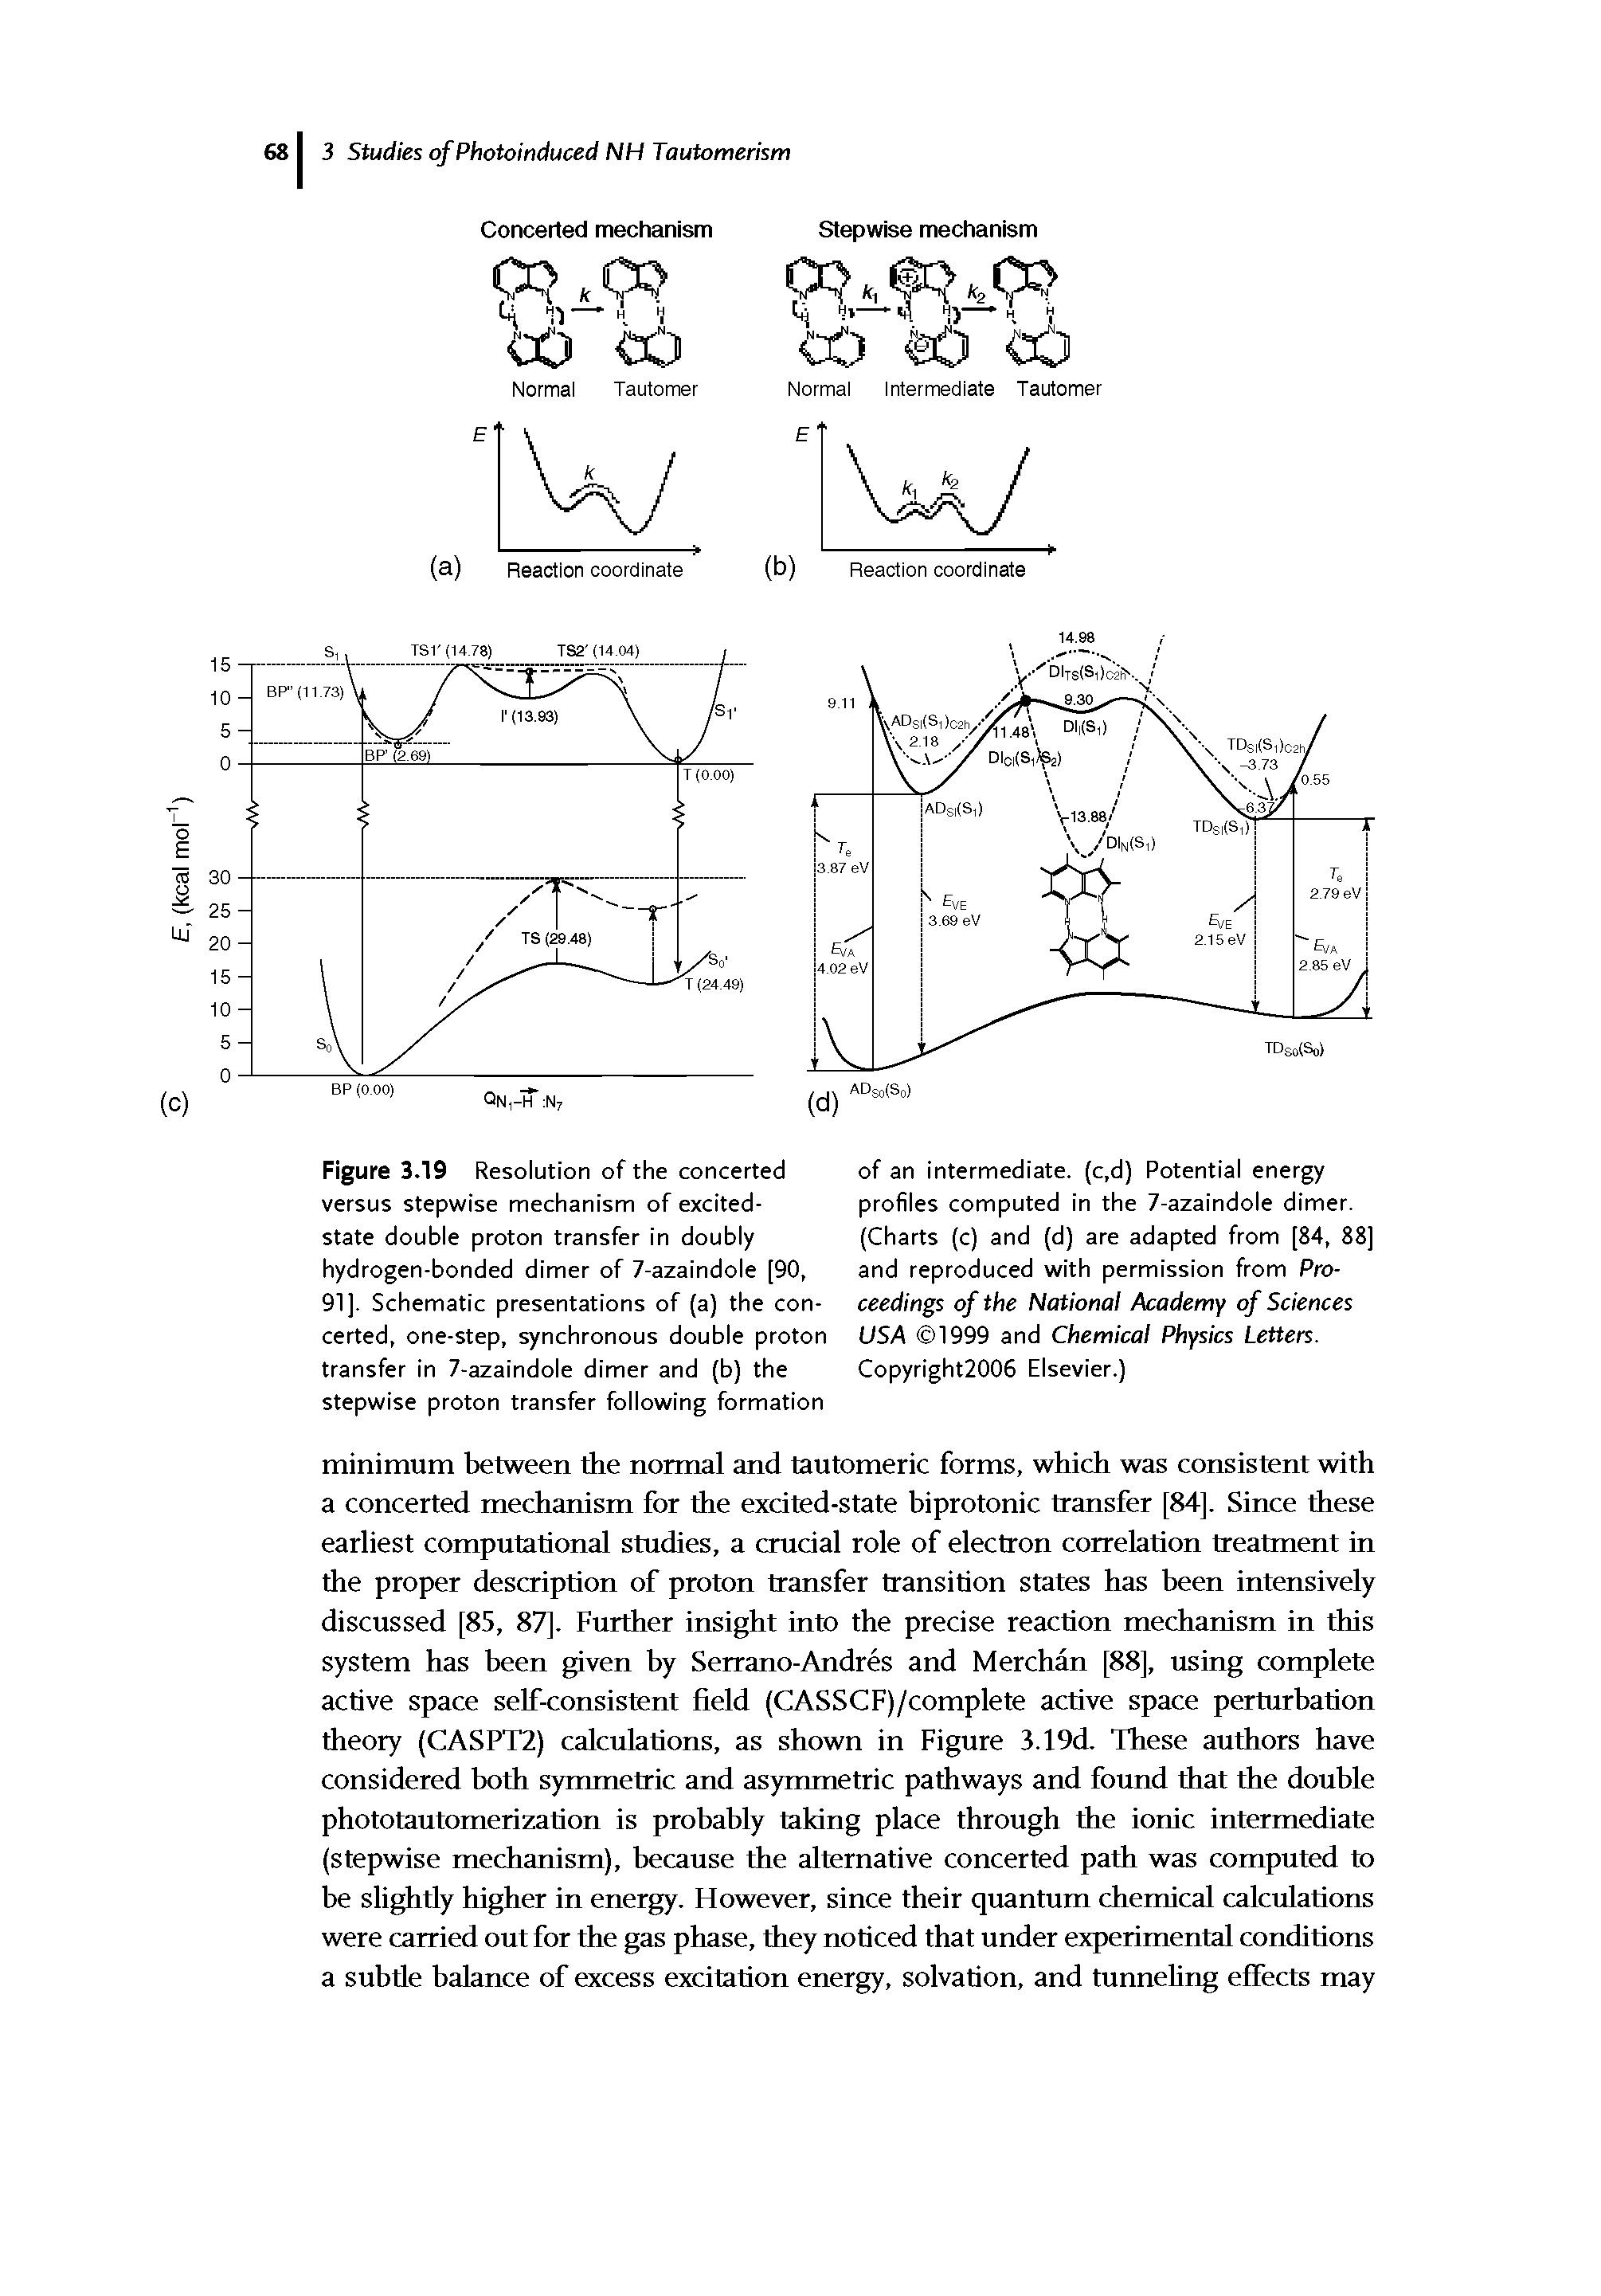 Figure 3.19 Resolution of the concerted versus stepwise mechanism of excited-state double proton transfer in doubly hydrogen-bonded dimer of 7-azaindole [90, 91]. Schematic presentations of (a) the concerted, one-step, synchronous double proton transfer in 7-azaindole dimer and (b) the stepwise proton transfer following formation...